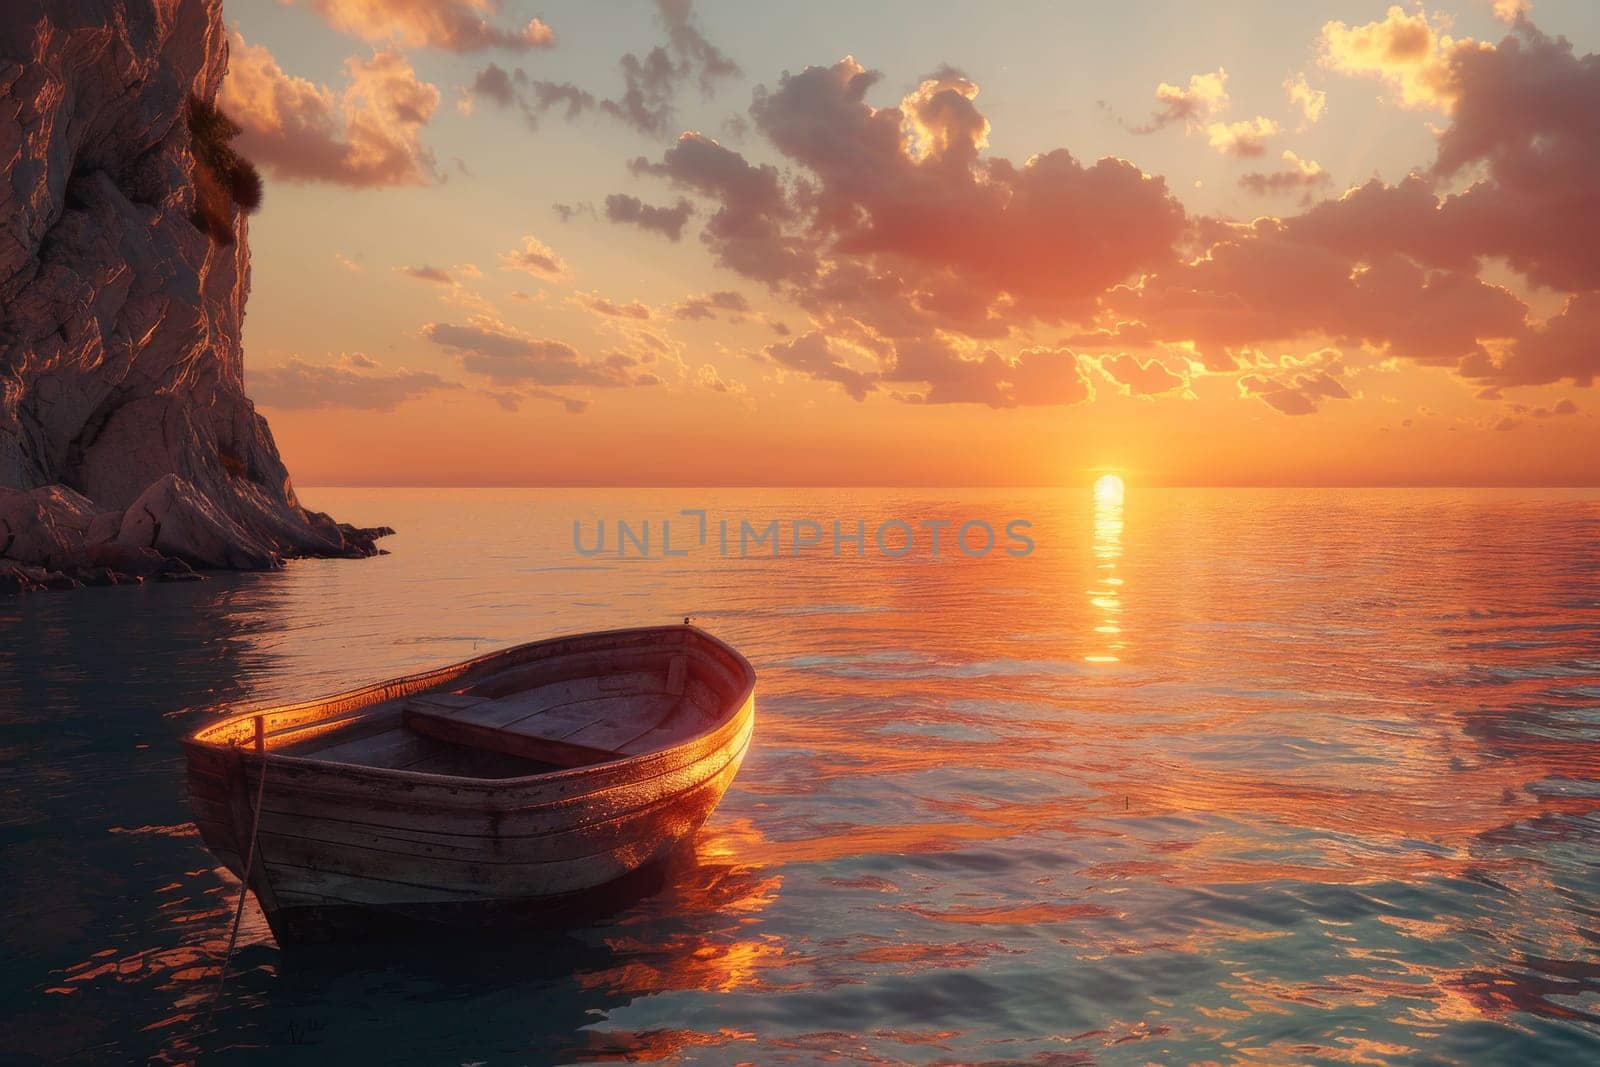 A small boat is floating in the ocean at sunset. The sky is filled with clouds and the sun is setting, creating a serene and peaceful atmosphere